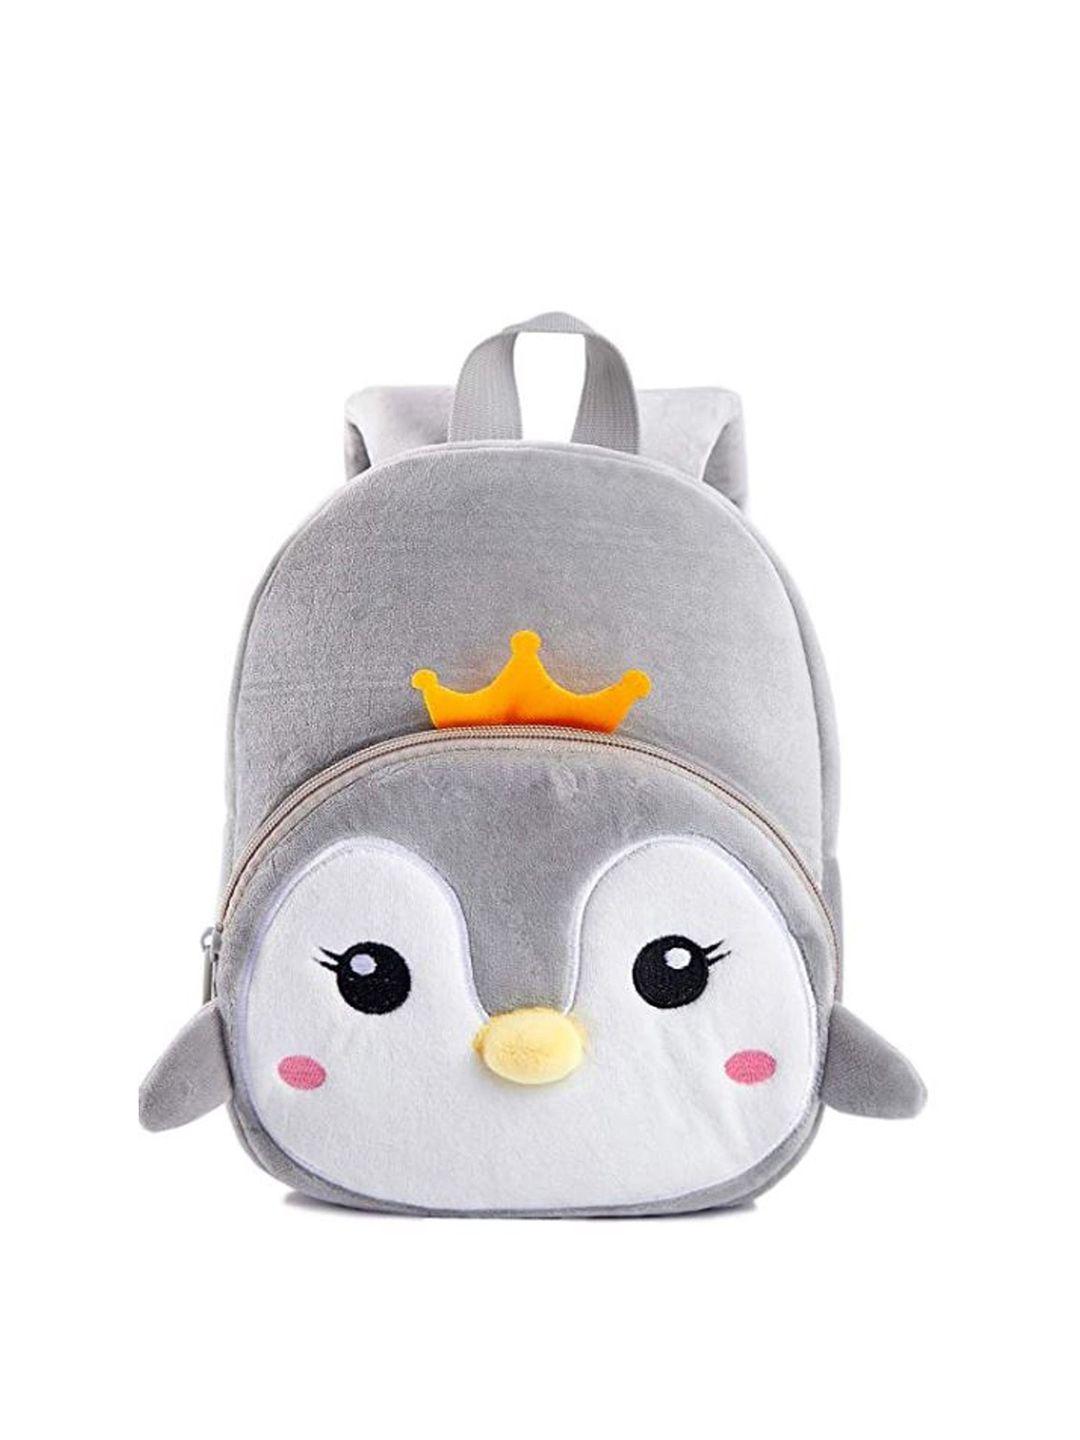 frantic kids grey & white graphic cat backpack